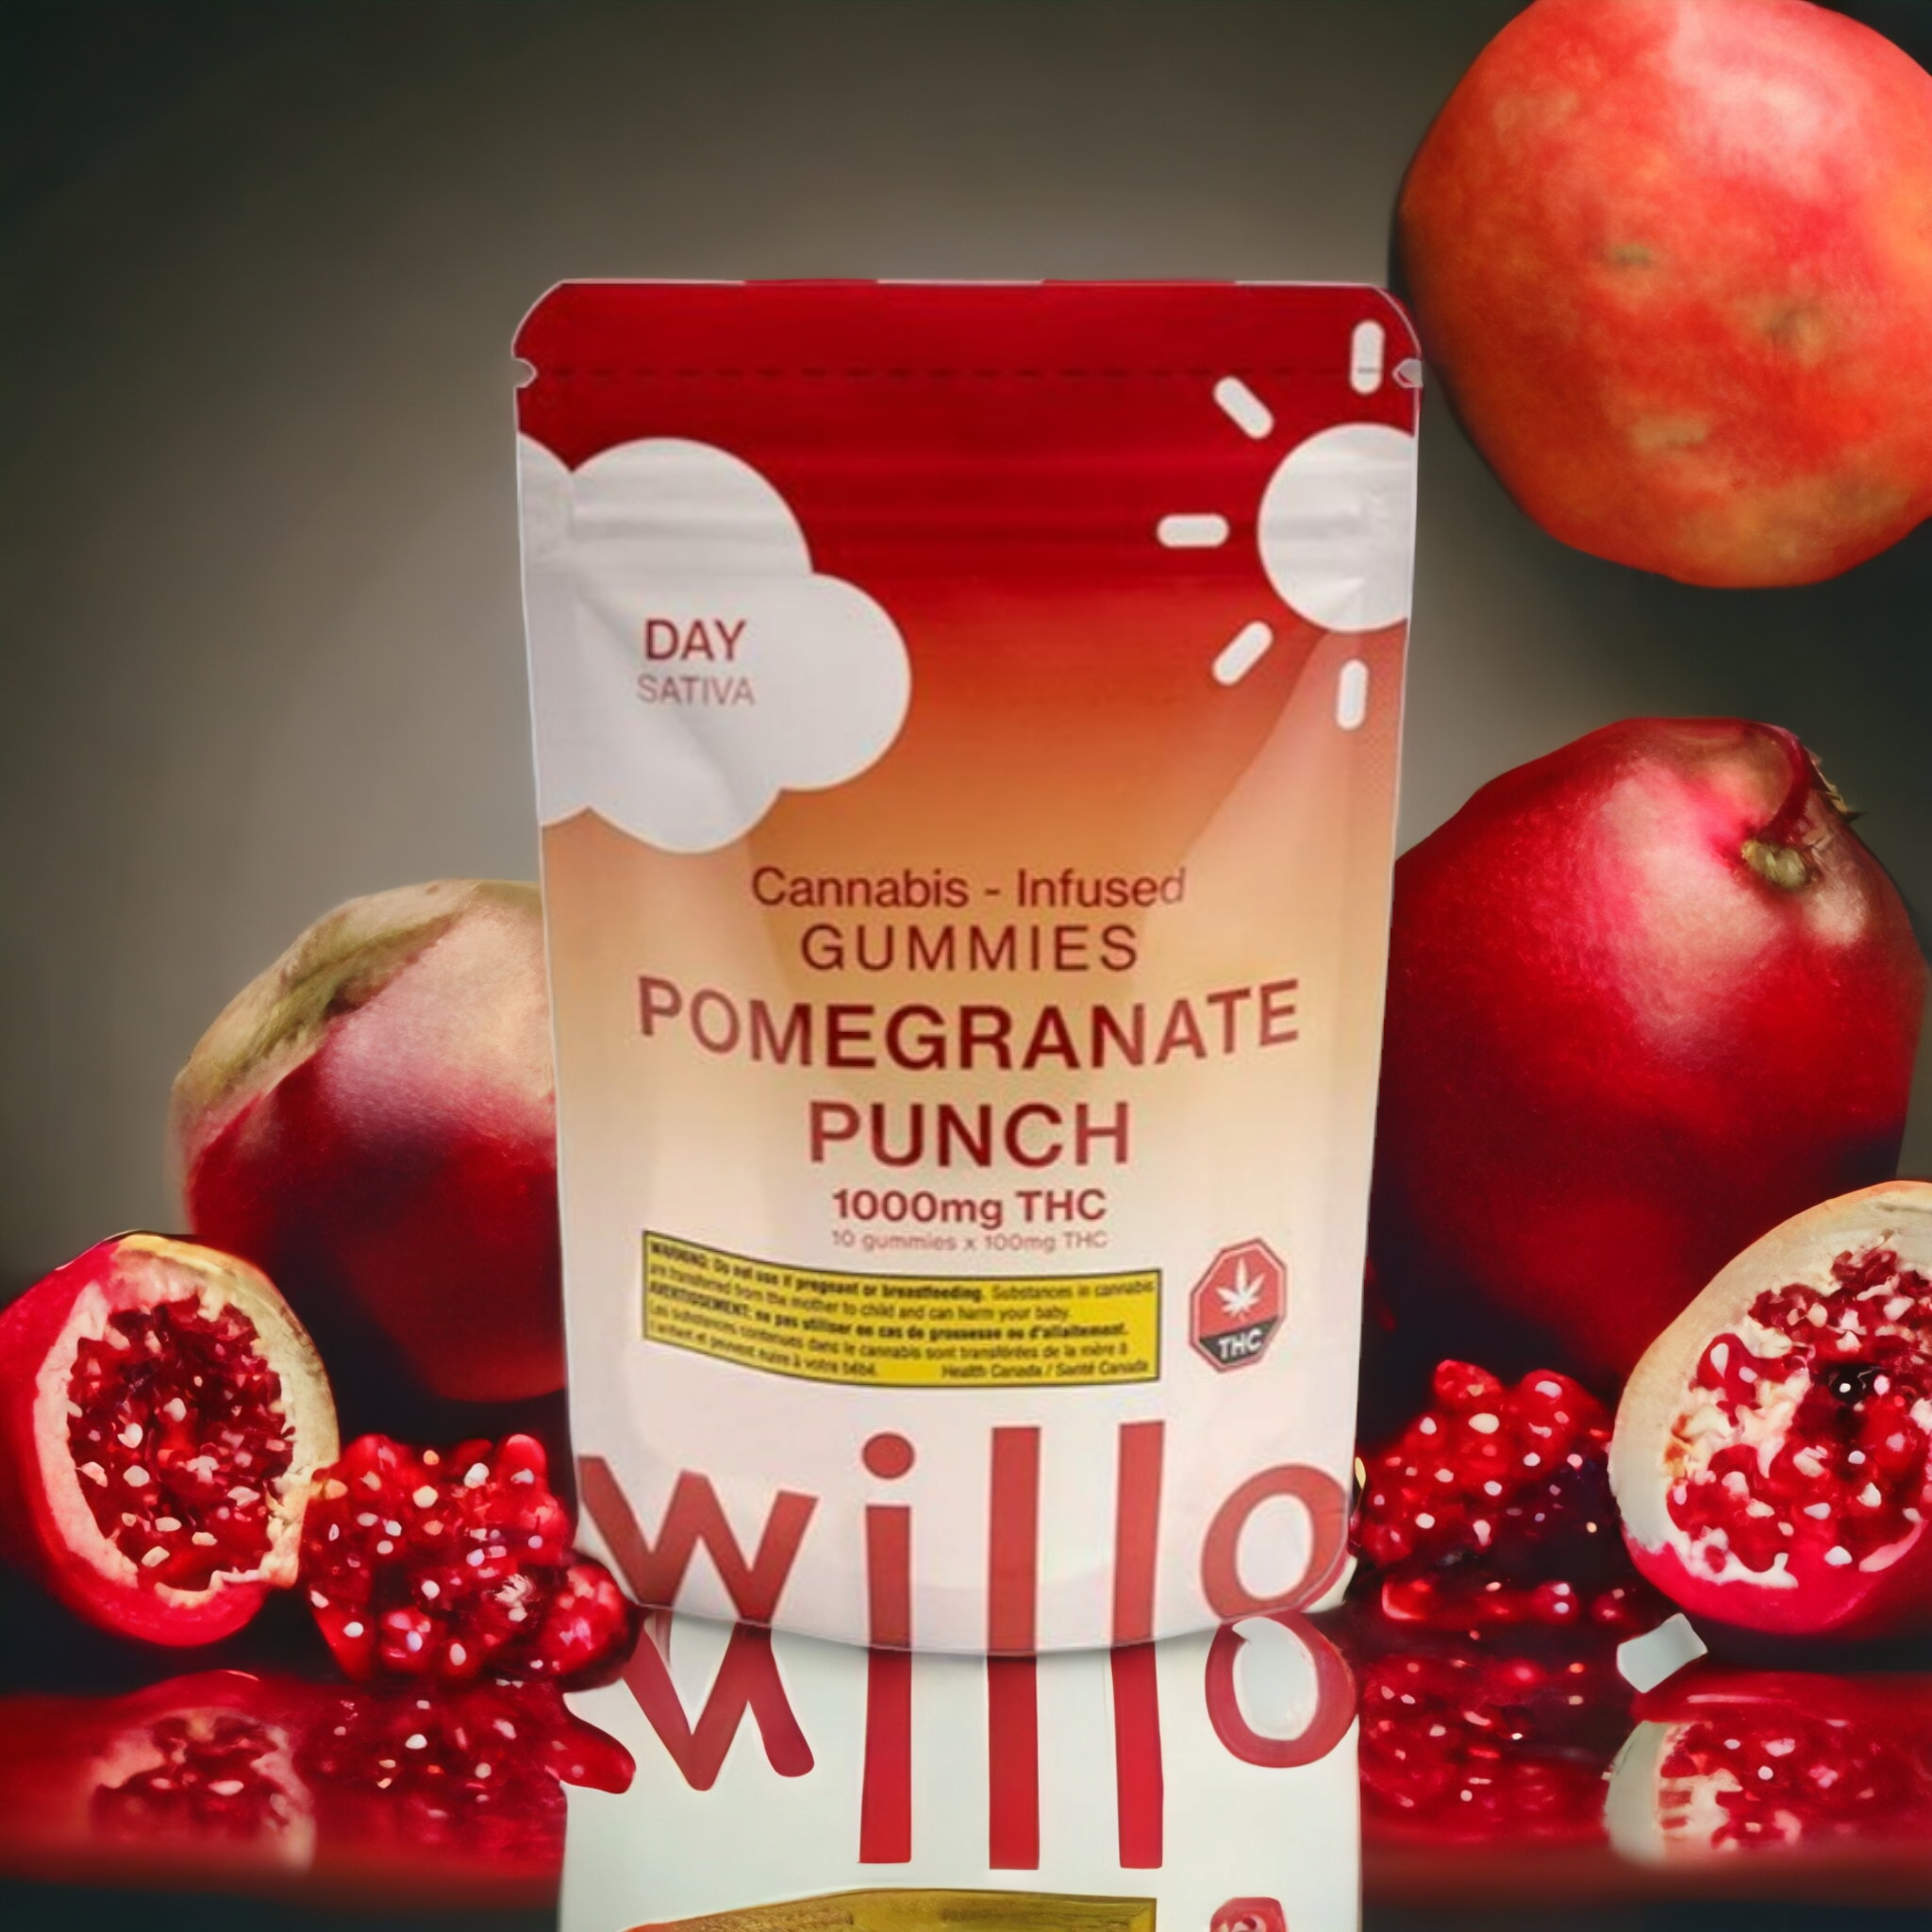 Willo – 1000mg THC Pomegranate Punch (Day) Gummies